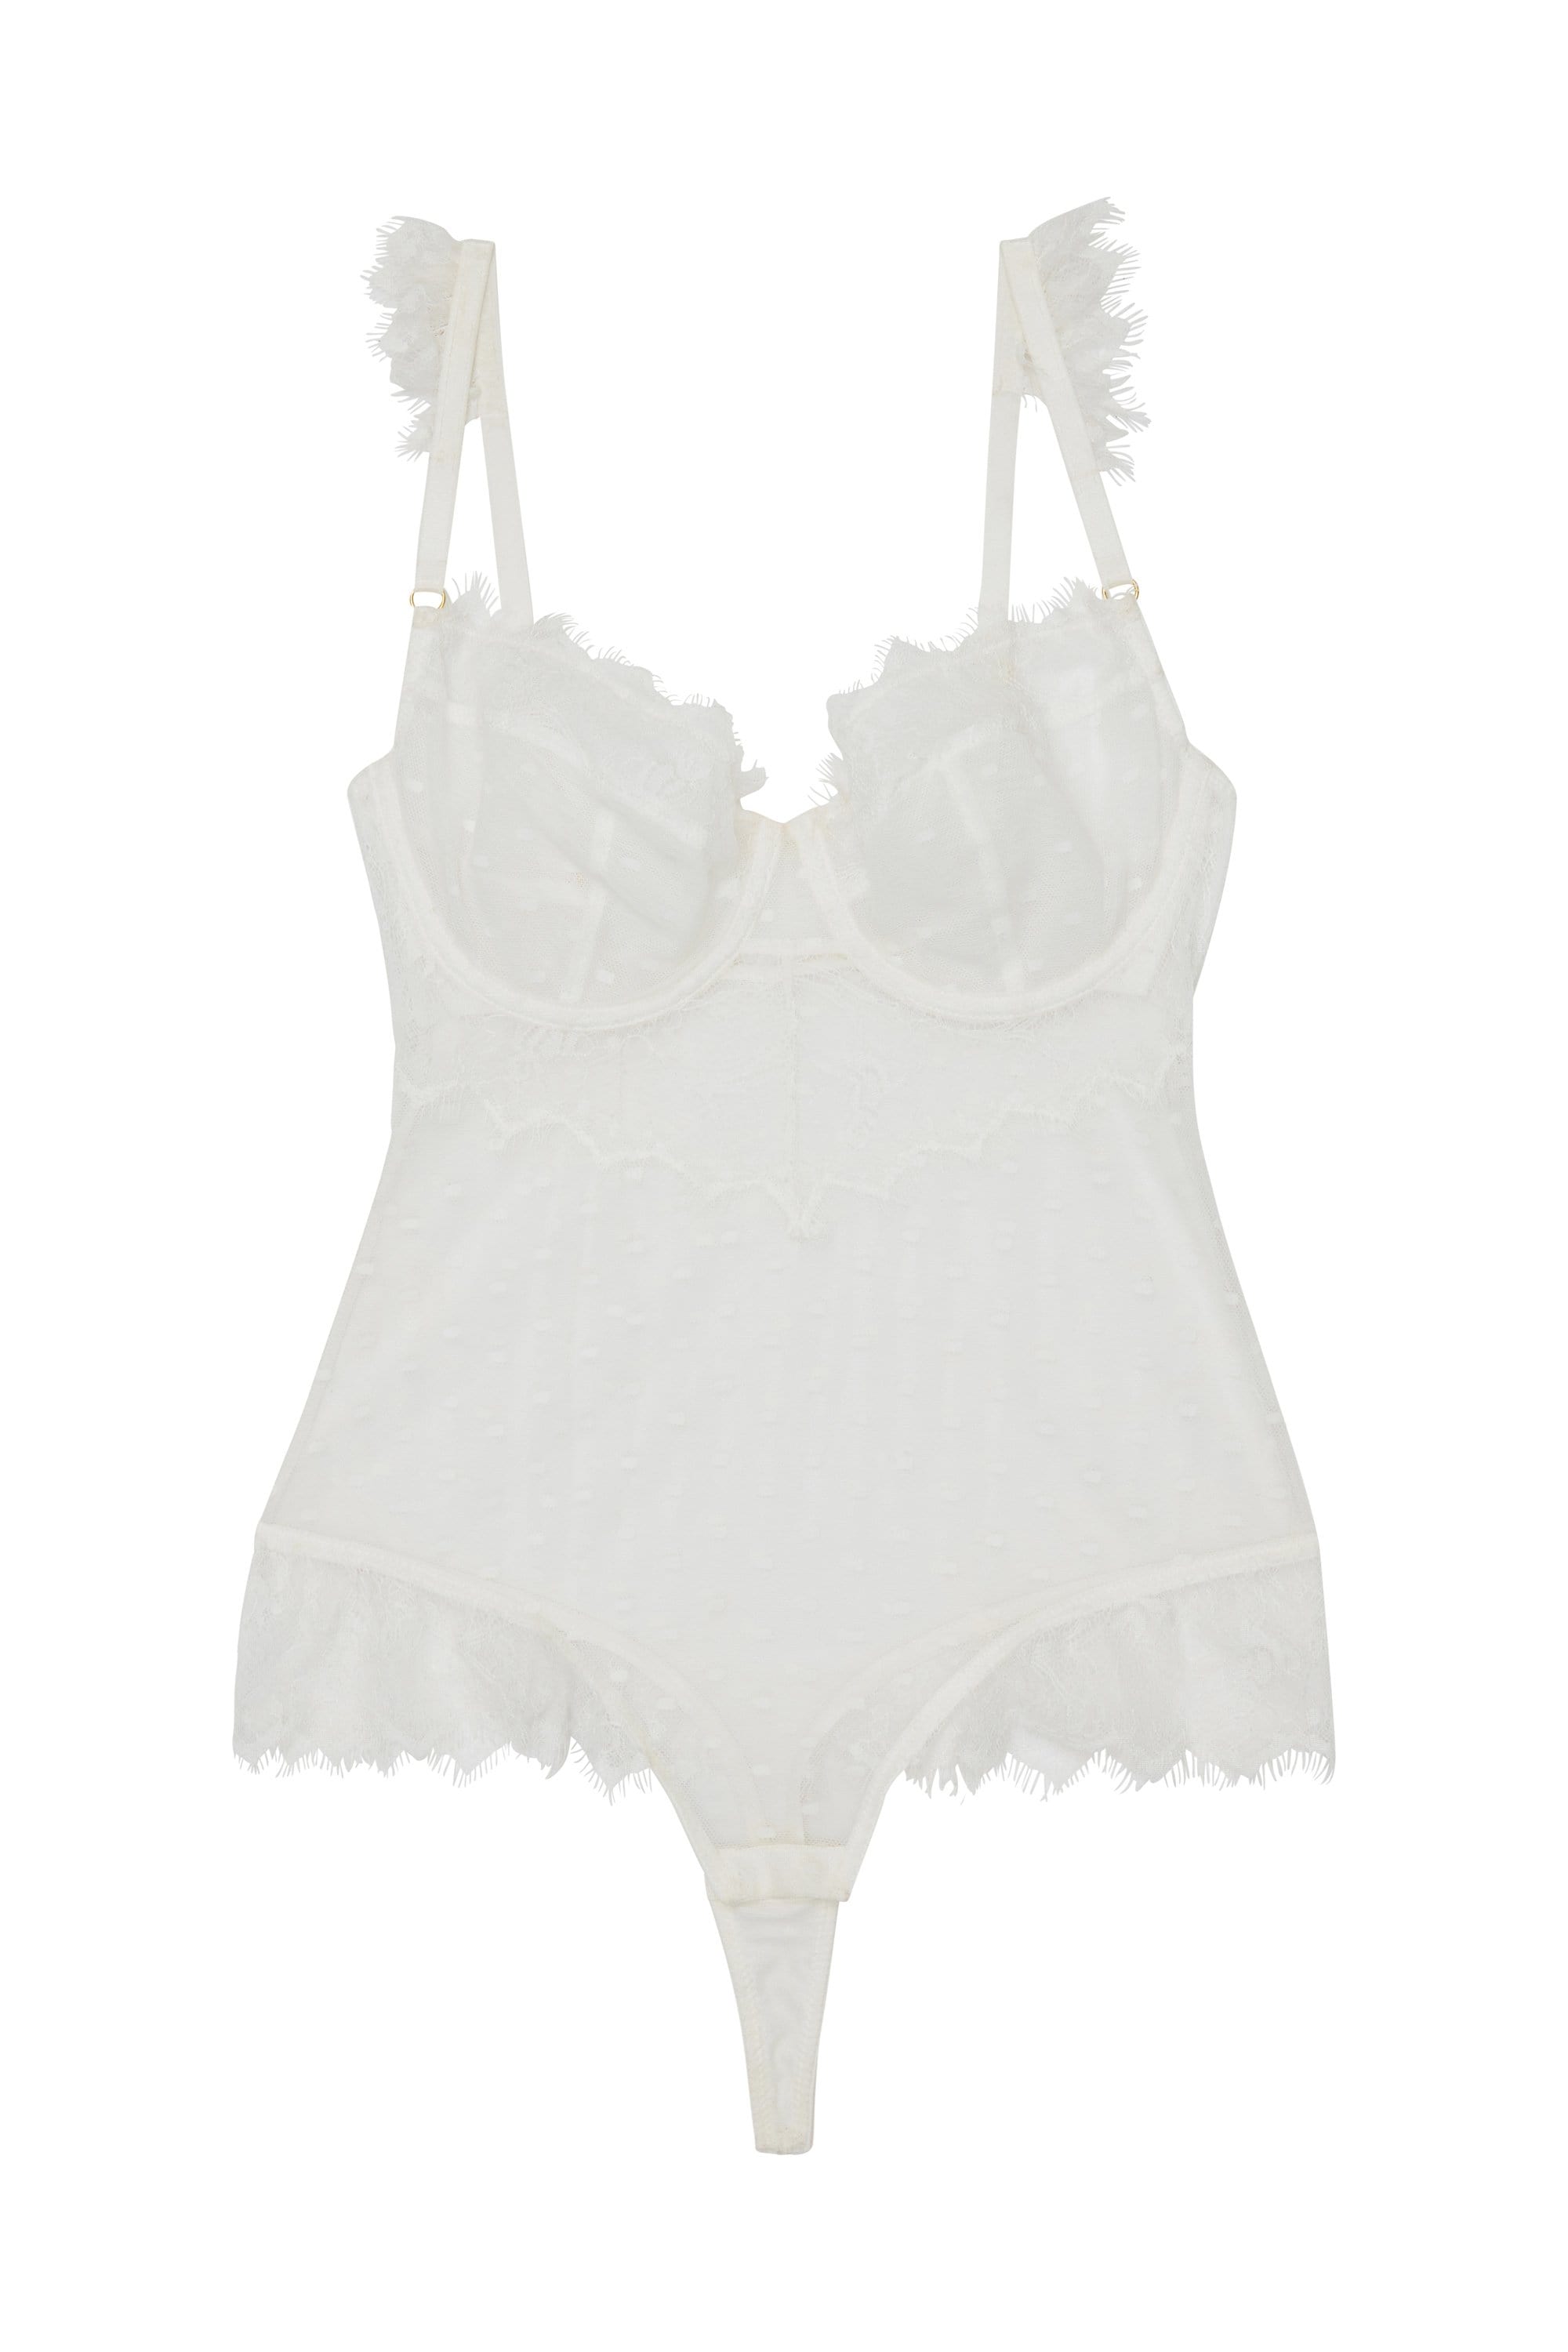 Wolf & Whistle Aime Dot Mesh and Lace Body Ivory